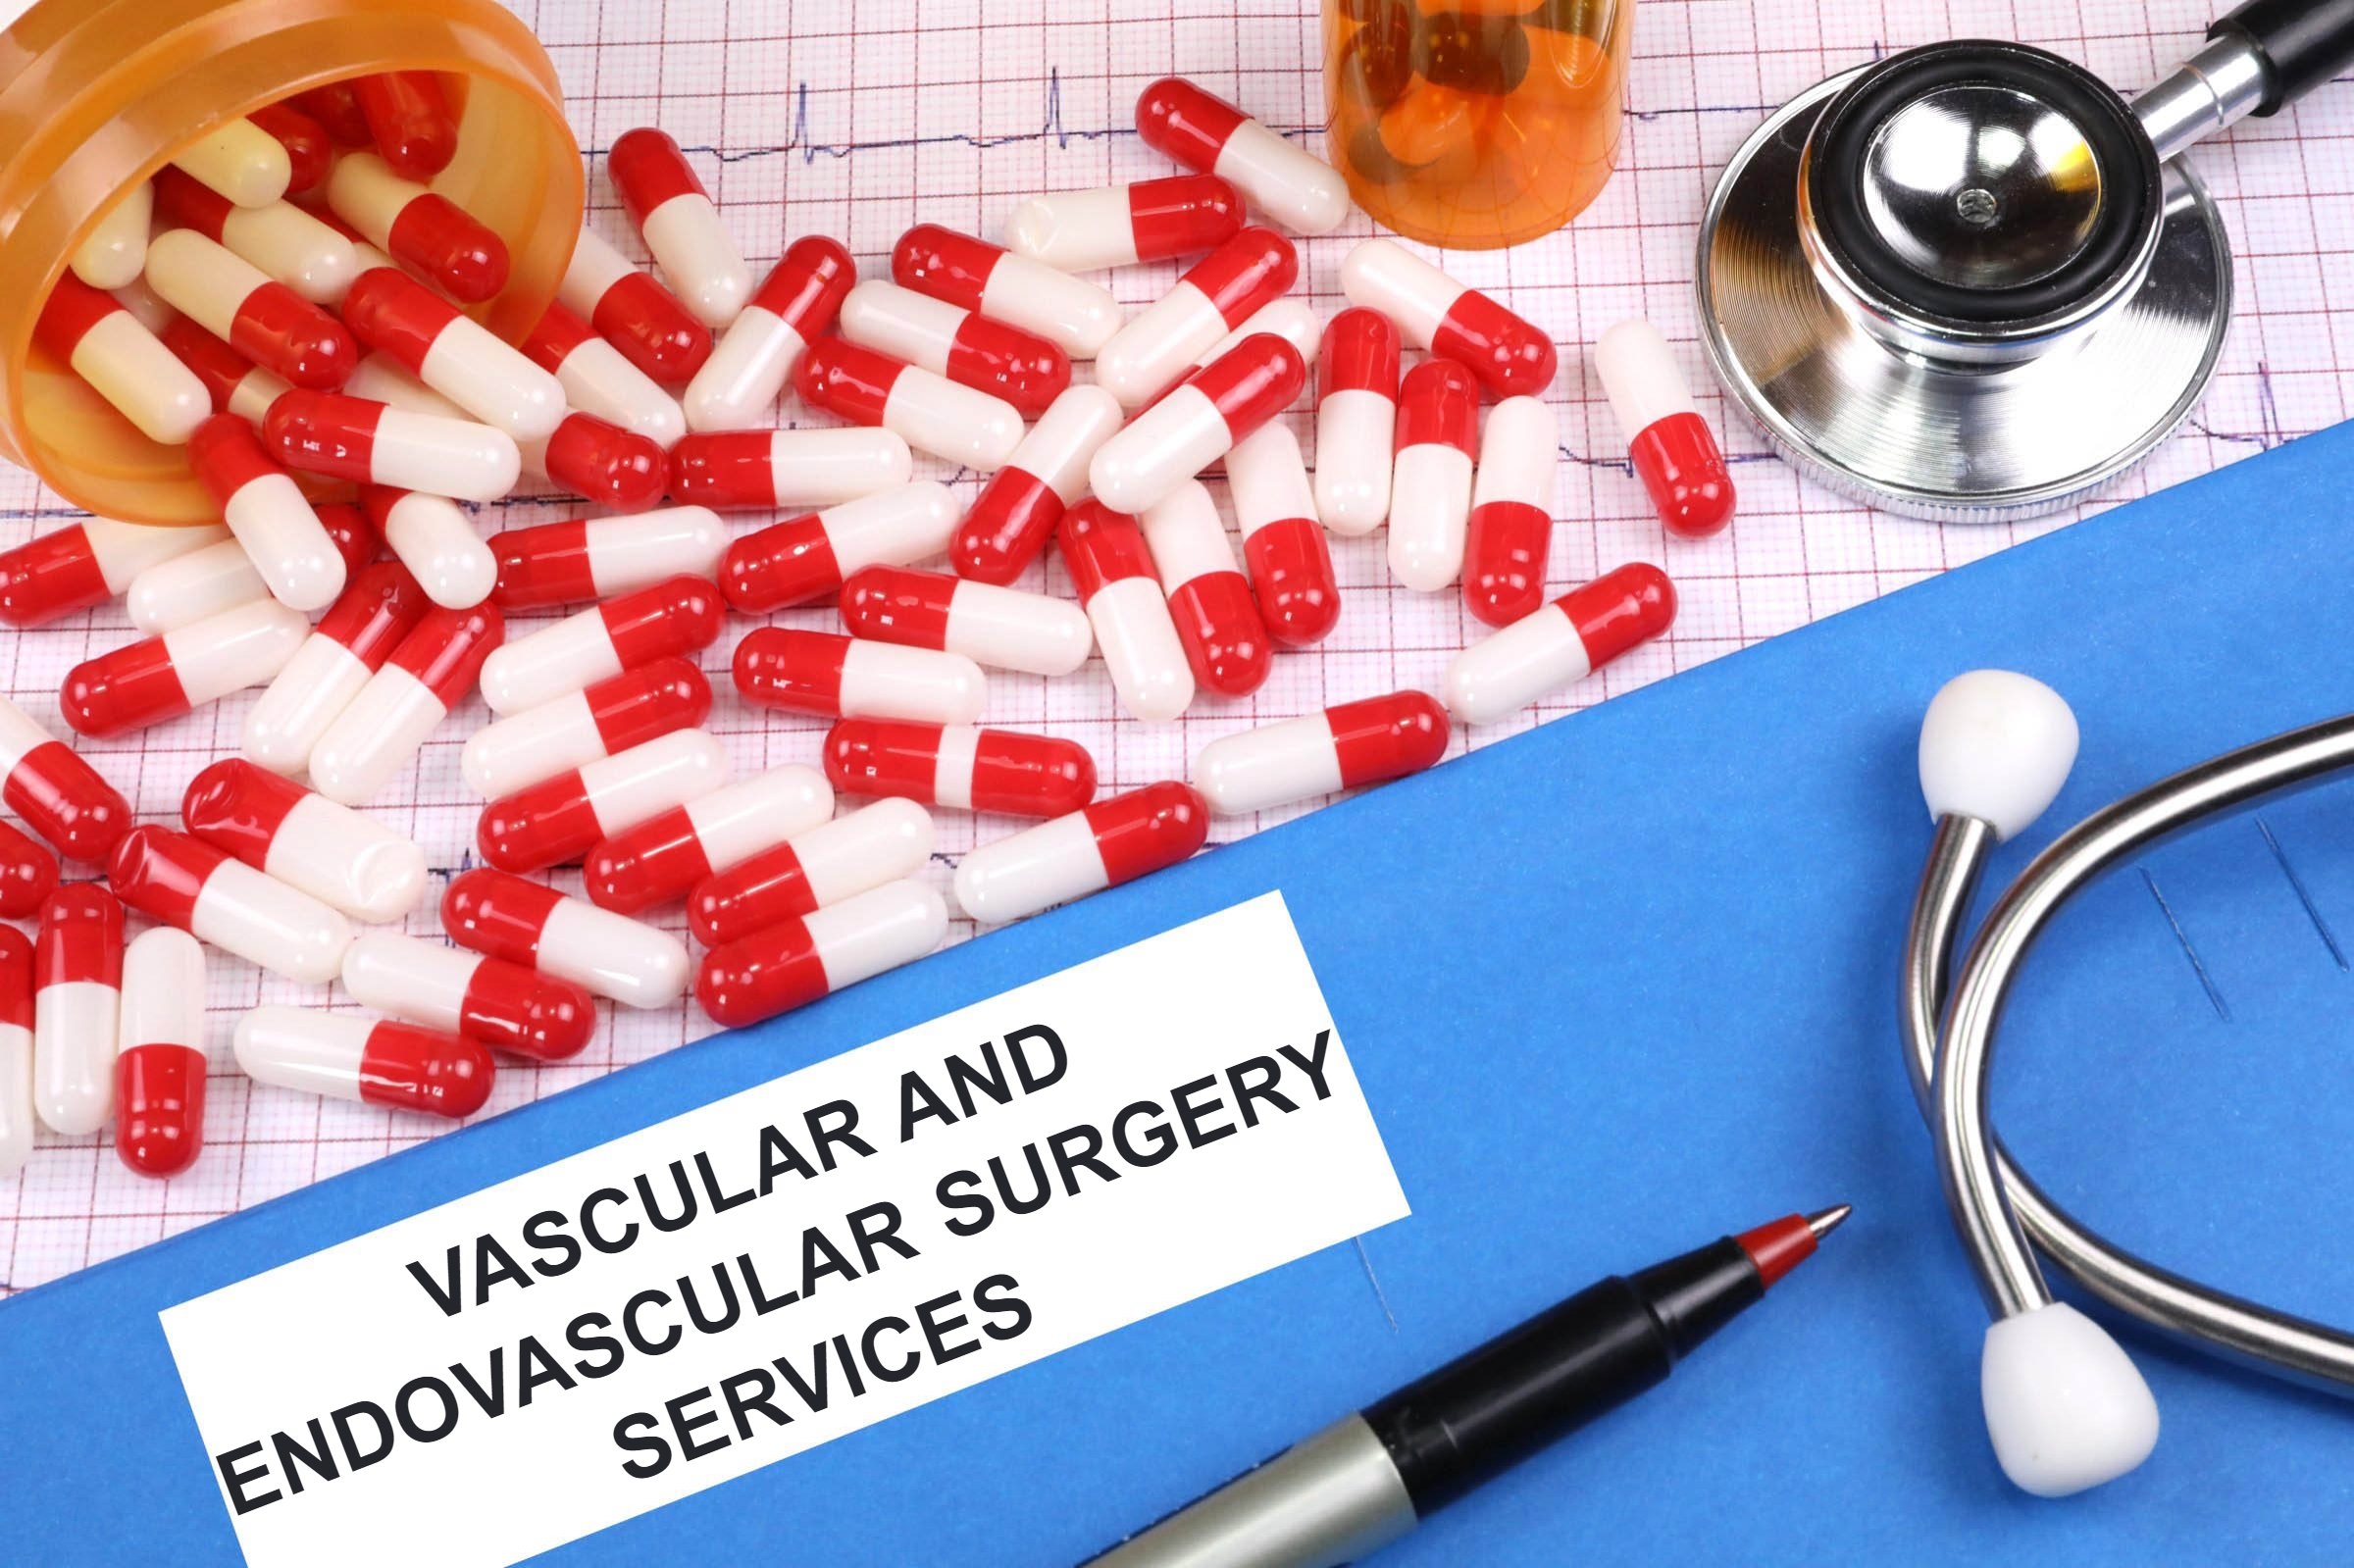 vascular and endovascular surgery services